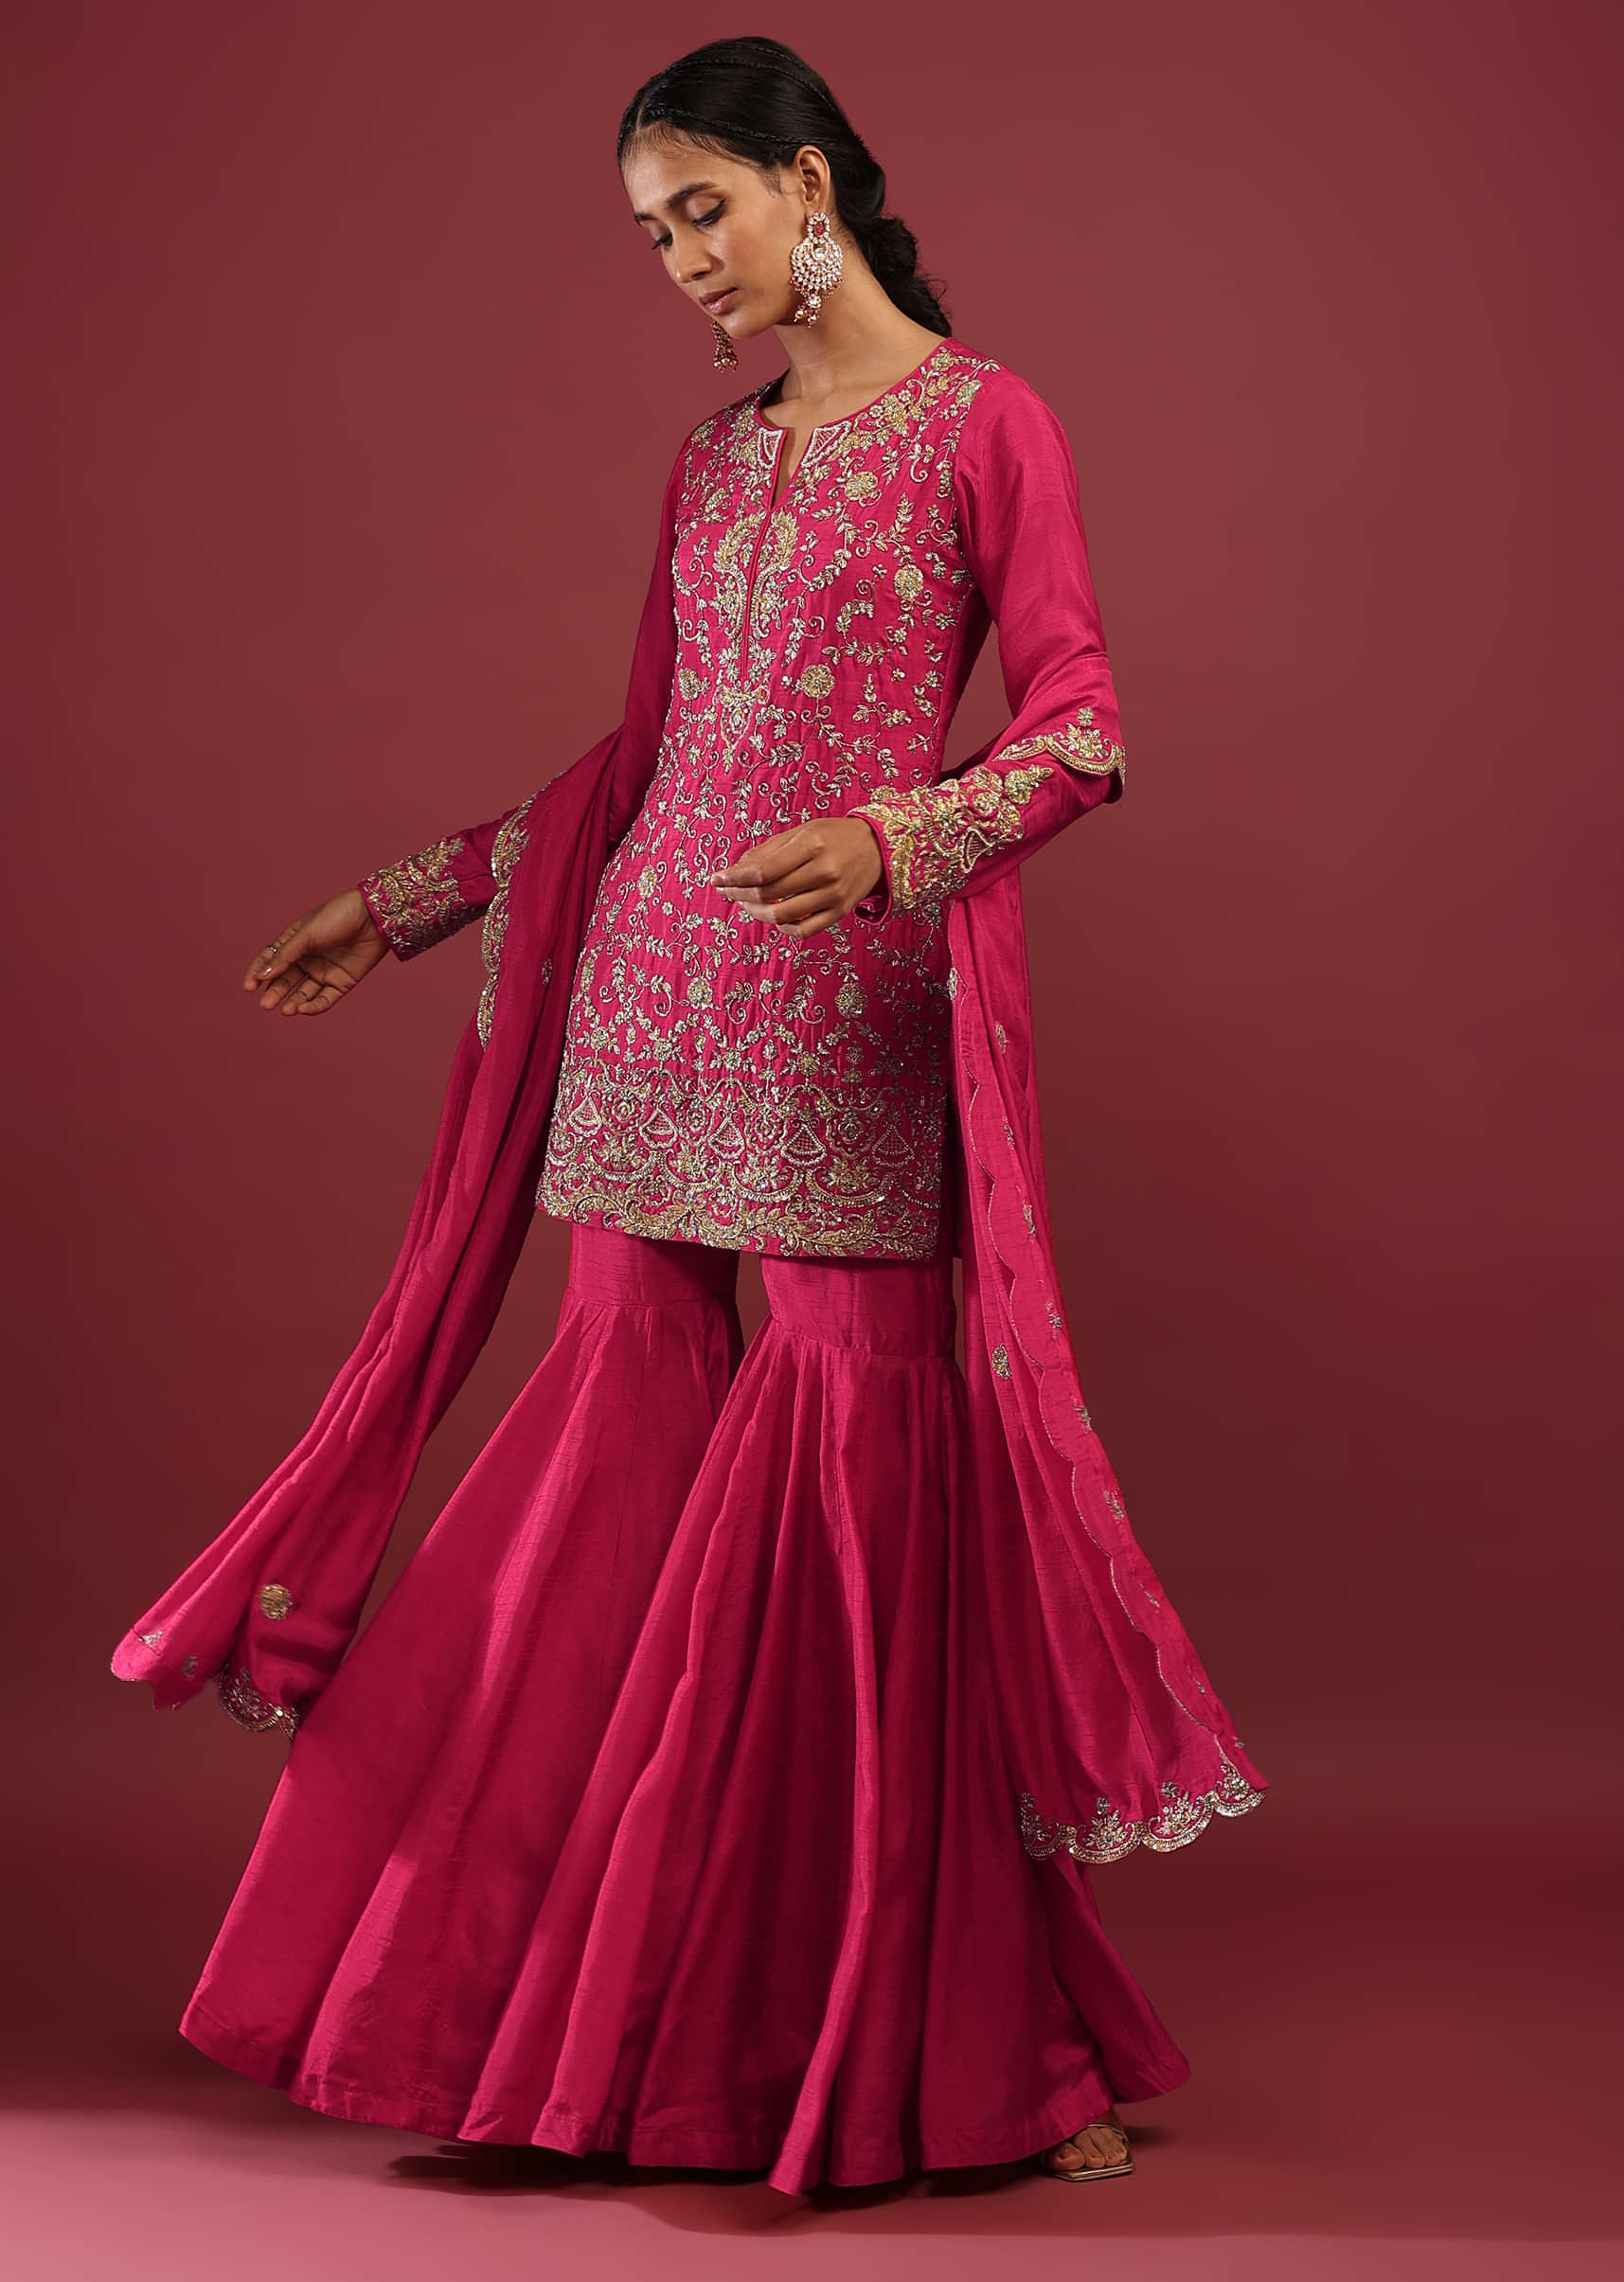 Rani Pink Sharara Suit In Raw Silk With Zardosi And Moti Embroidered Floral Detailing